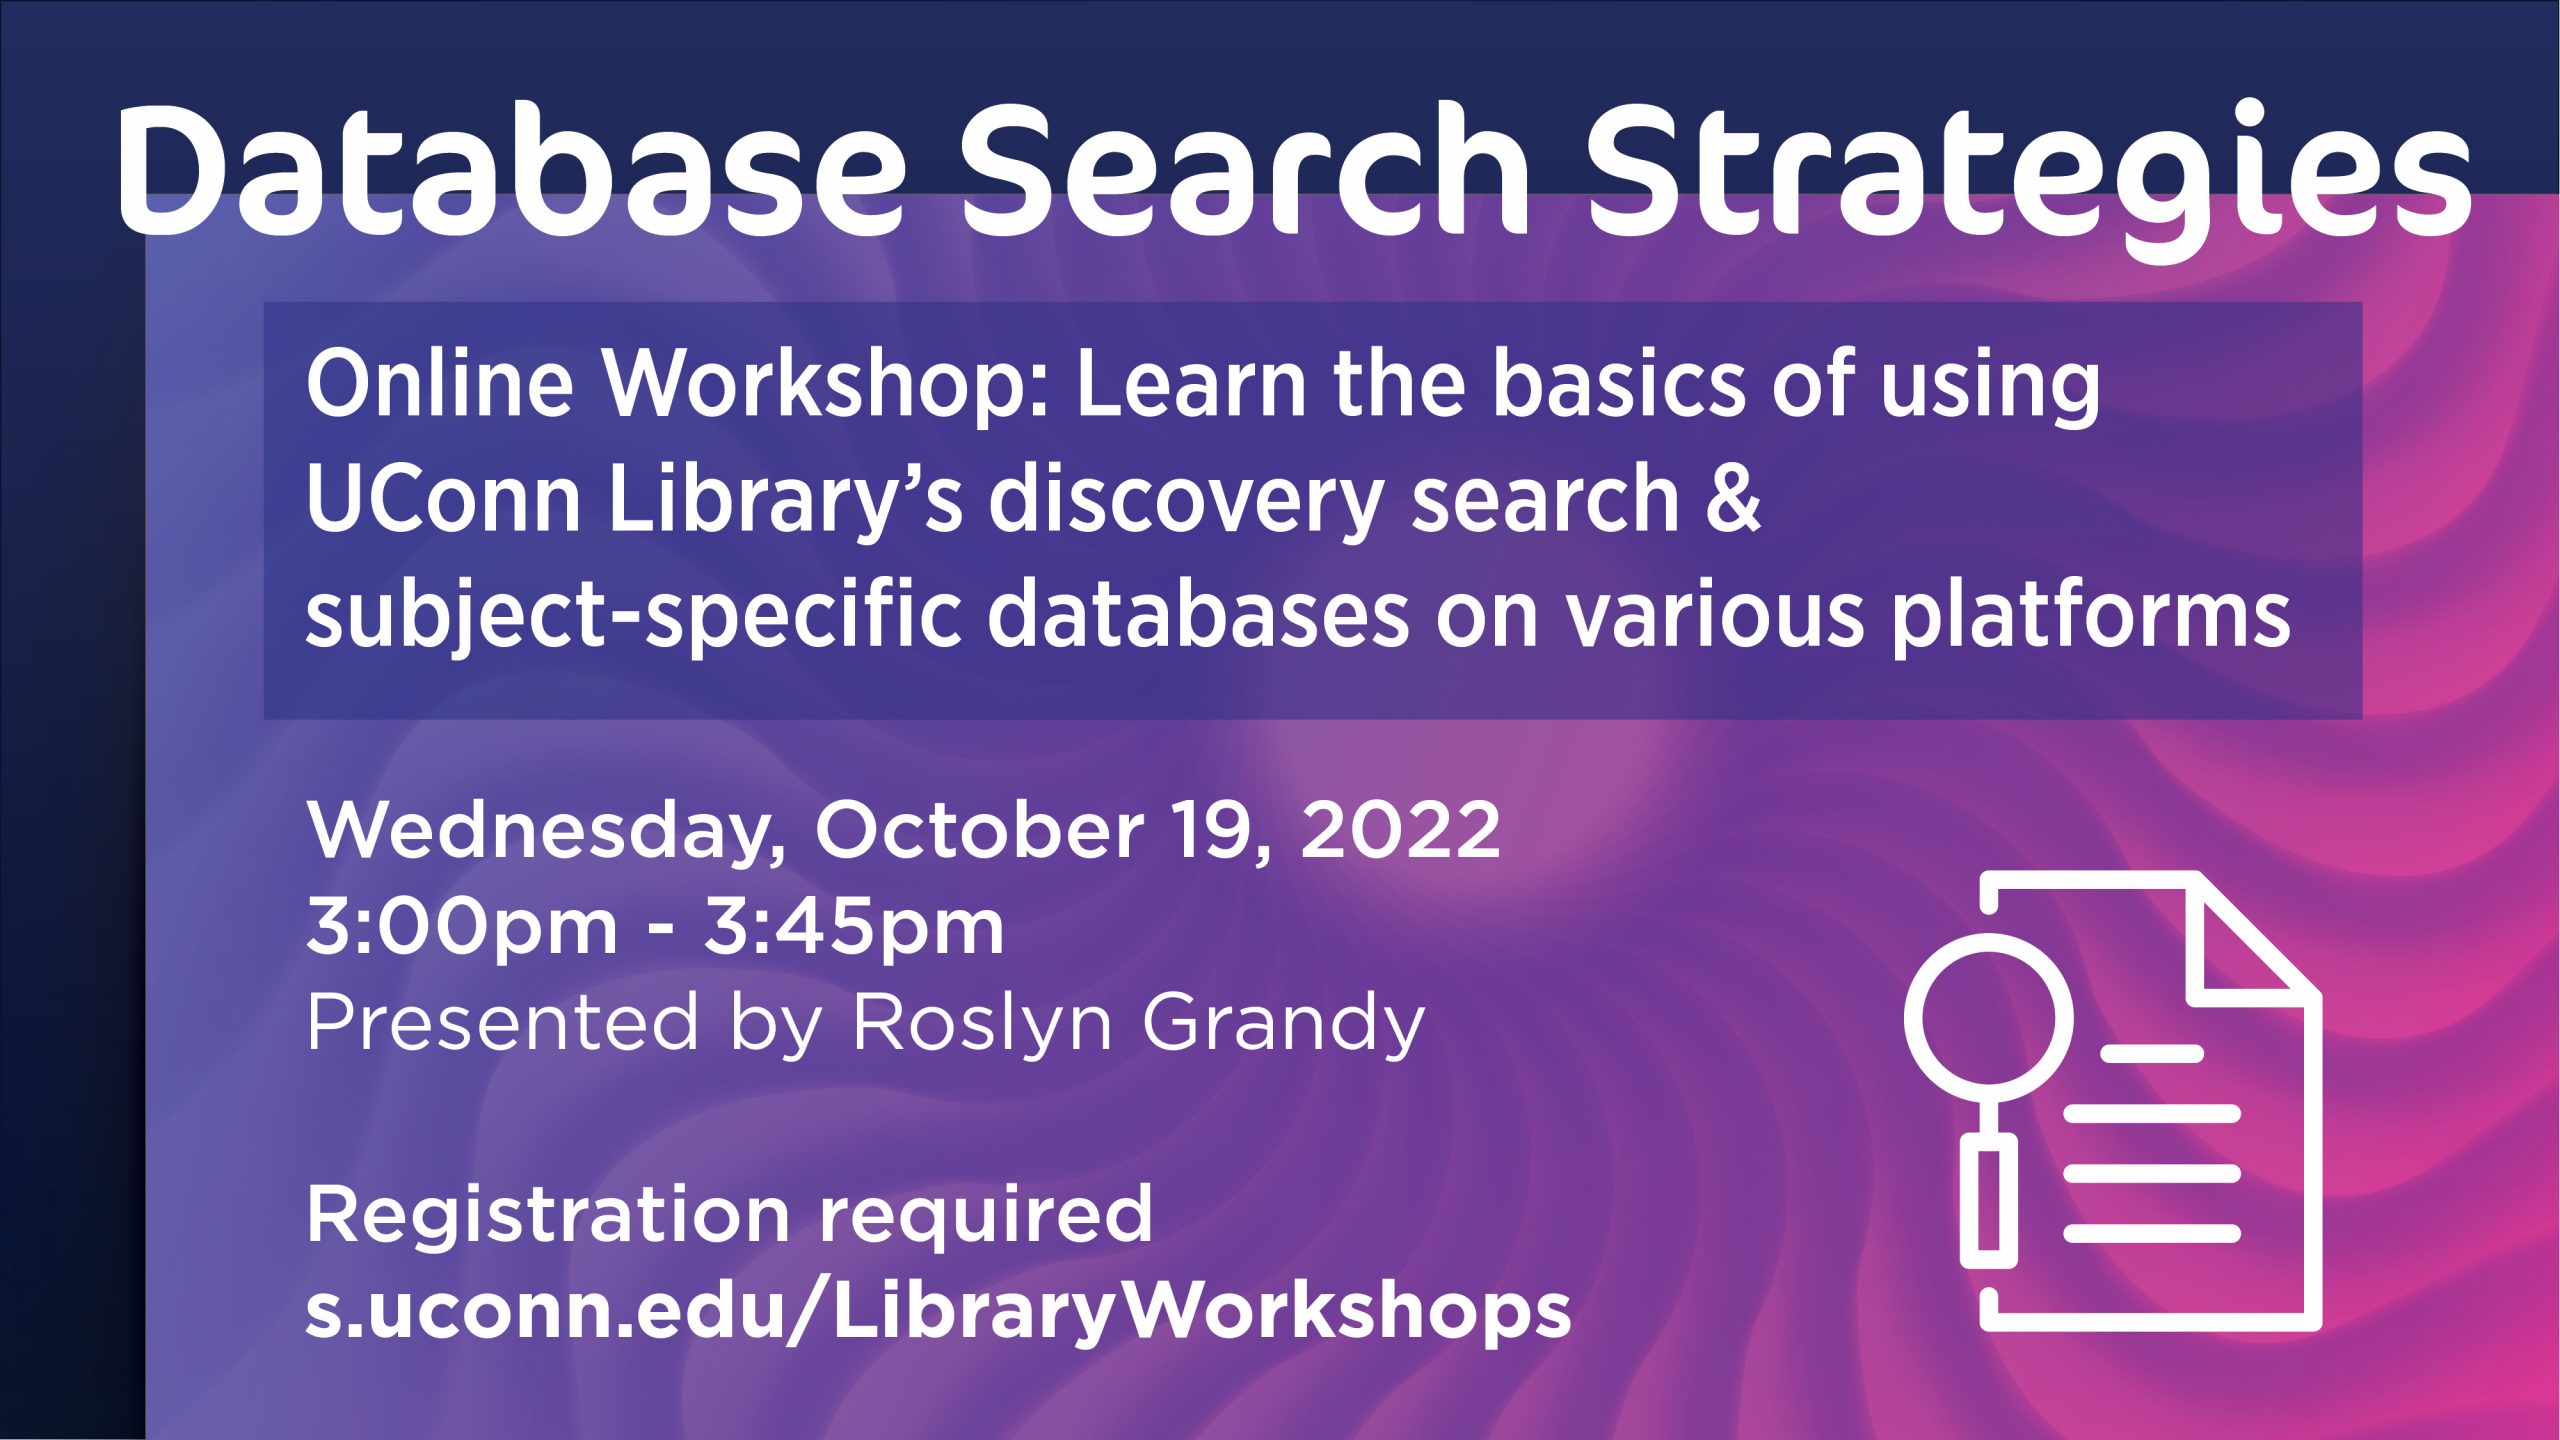 Workshop marketing image with an abstract spiral background in pink and purple with white text that reads: Database Search Strategies. Online Workshop: Learn the basics of using UConn Library’s discovery search & subject-specific databases on various platforms. Wednesday, October 19, 2022 3:00pm - 3:45pm. Presented by Roslyn Grandy. Registration required, s.uconn.edu/LibraryWorkshops